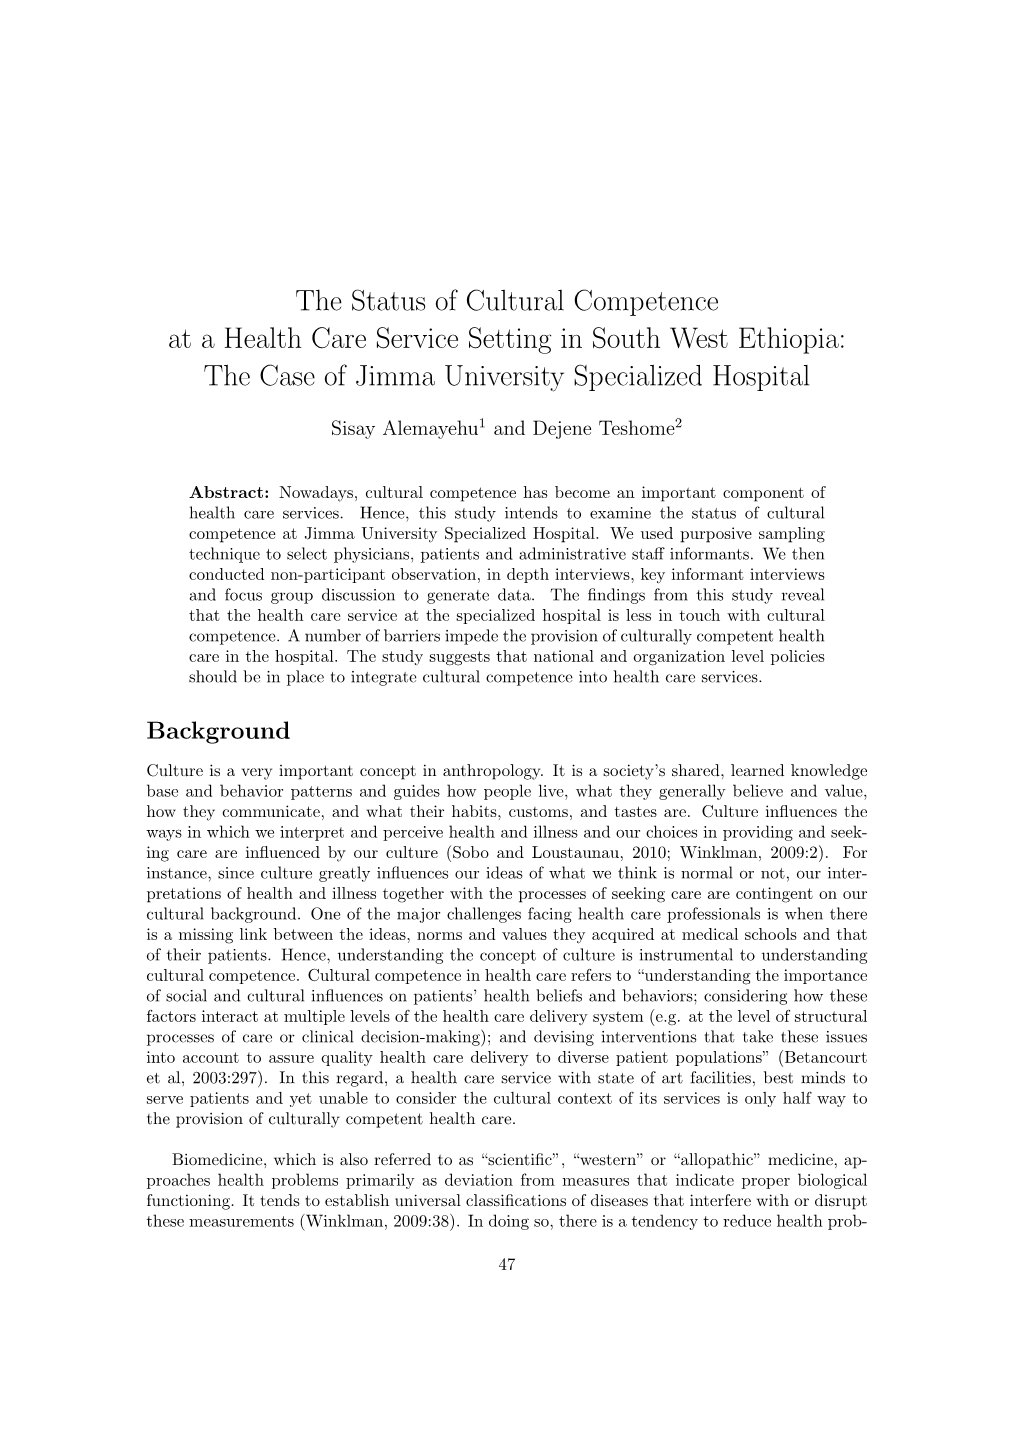 The Status of Cultural Competence at a Health Care Service Setting in South West Ethiopia: the Case of Jimma University Specialized Hospital